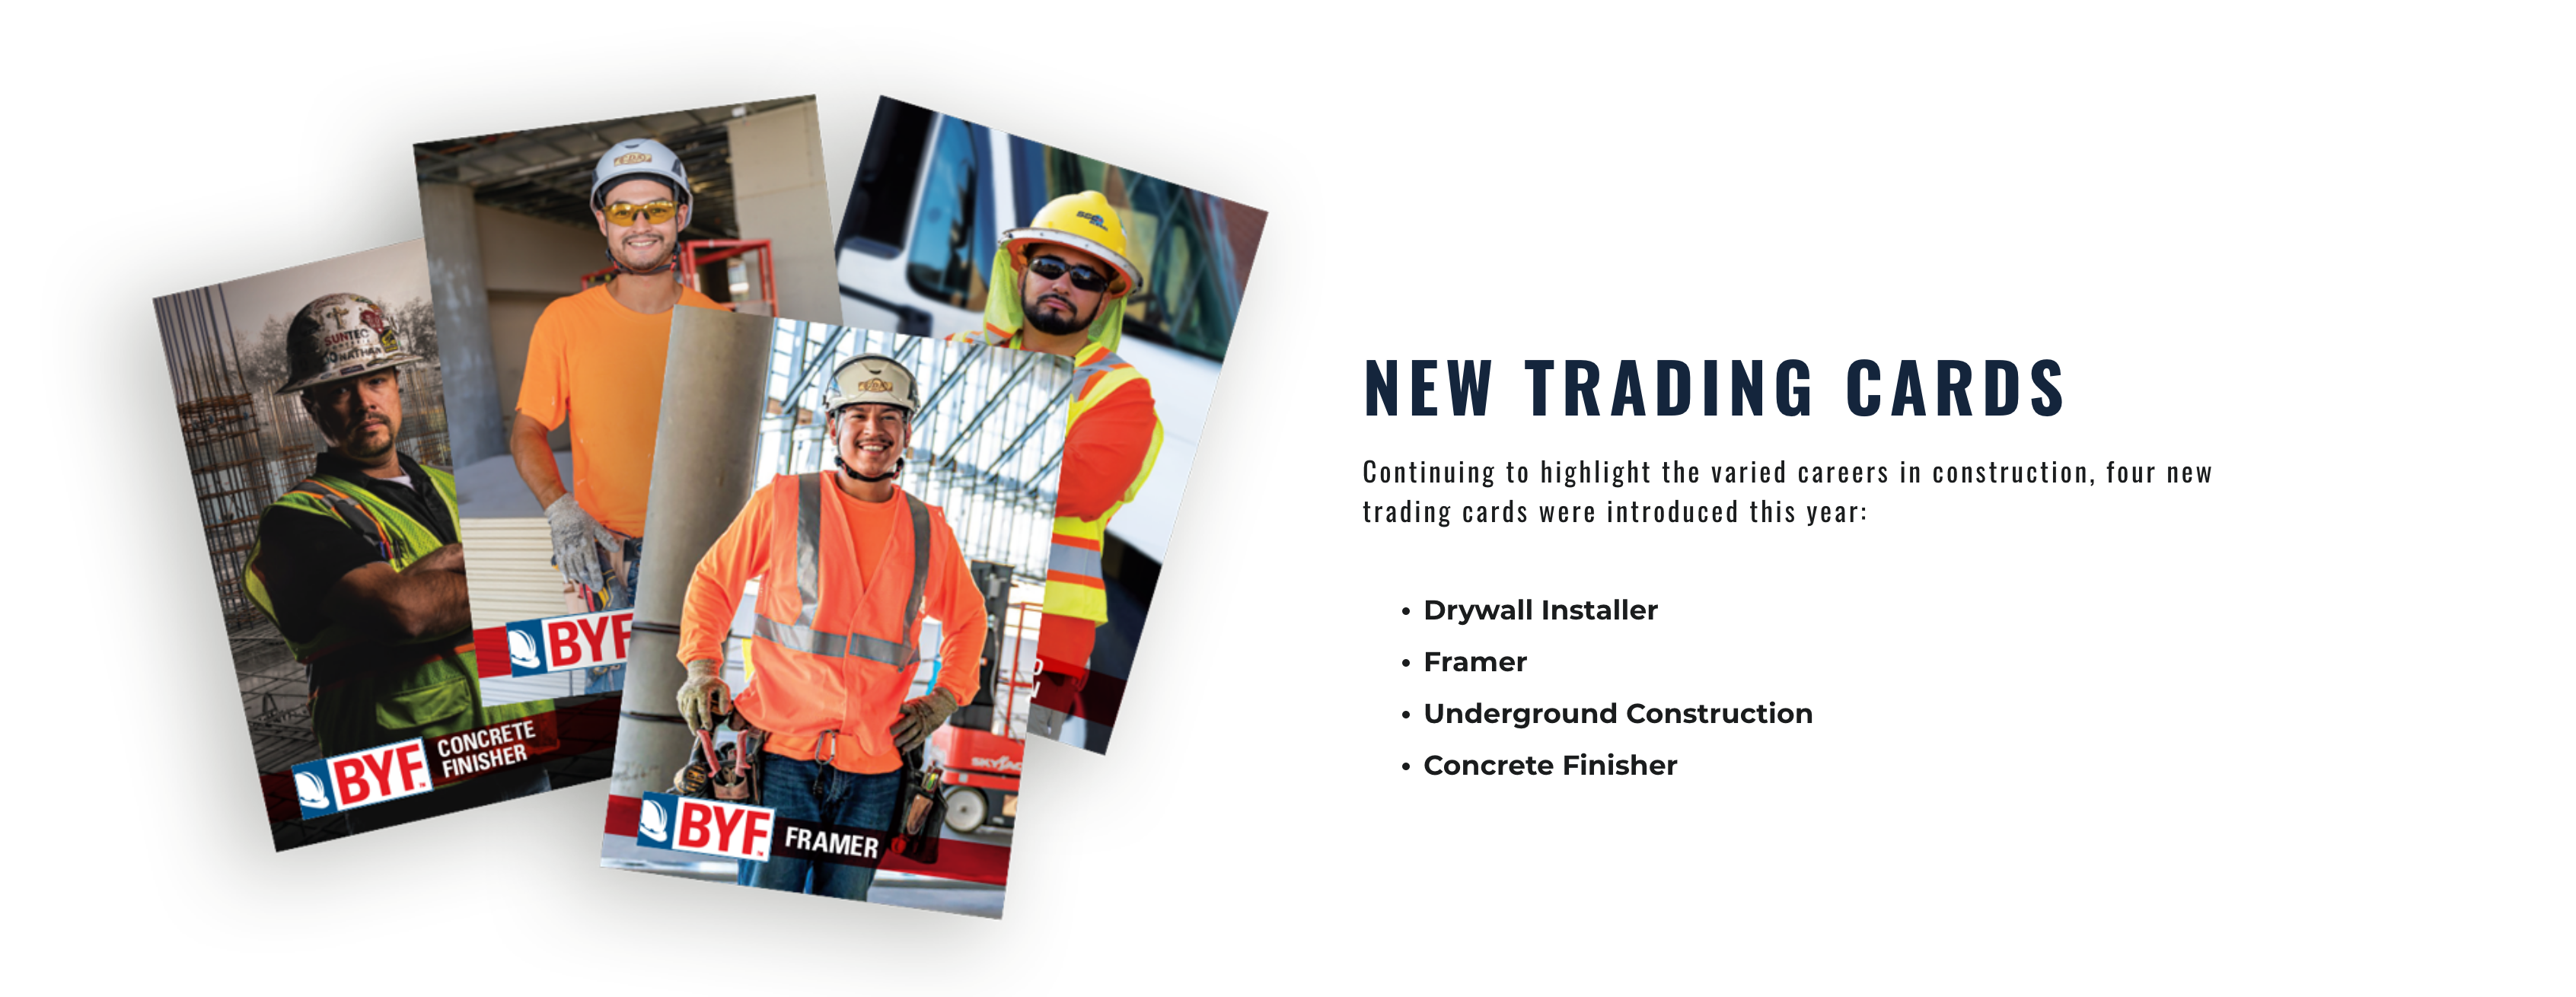 New Trading Cards. Continuing to highlight the varied careers in construction, four new trading cards were introduced this year: Drywall Installer. Framer Underground Construction. Concrete Finisher.